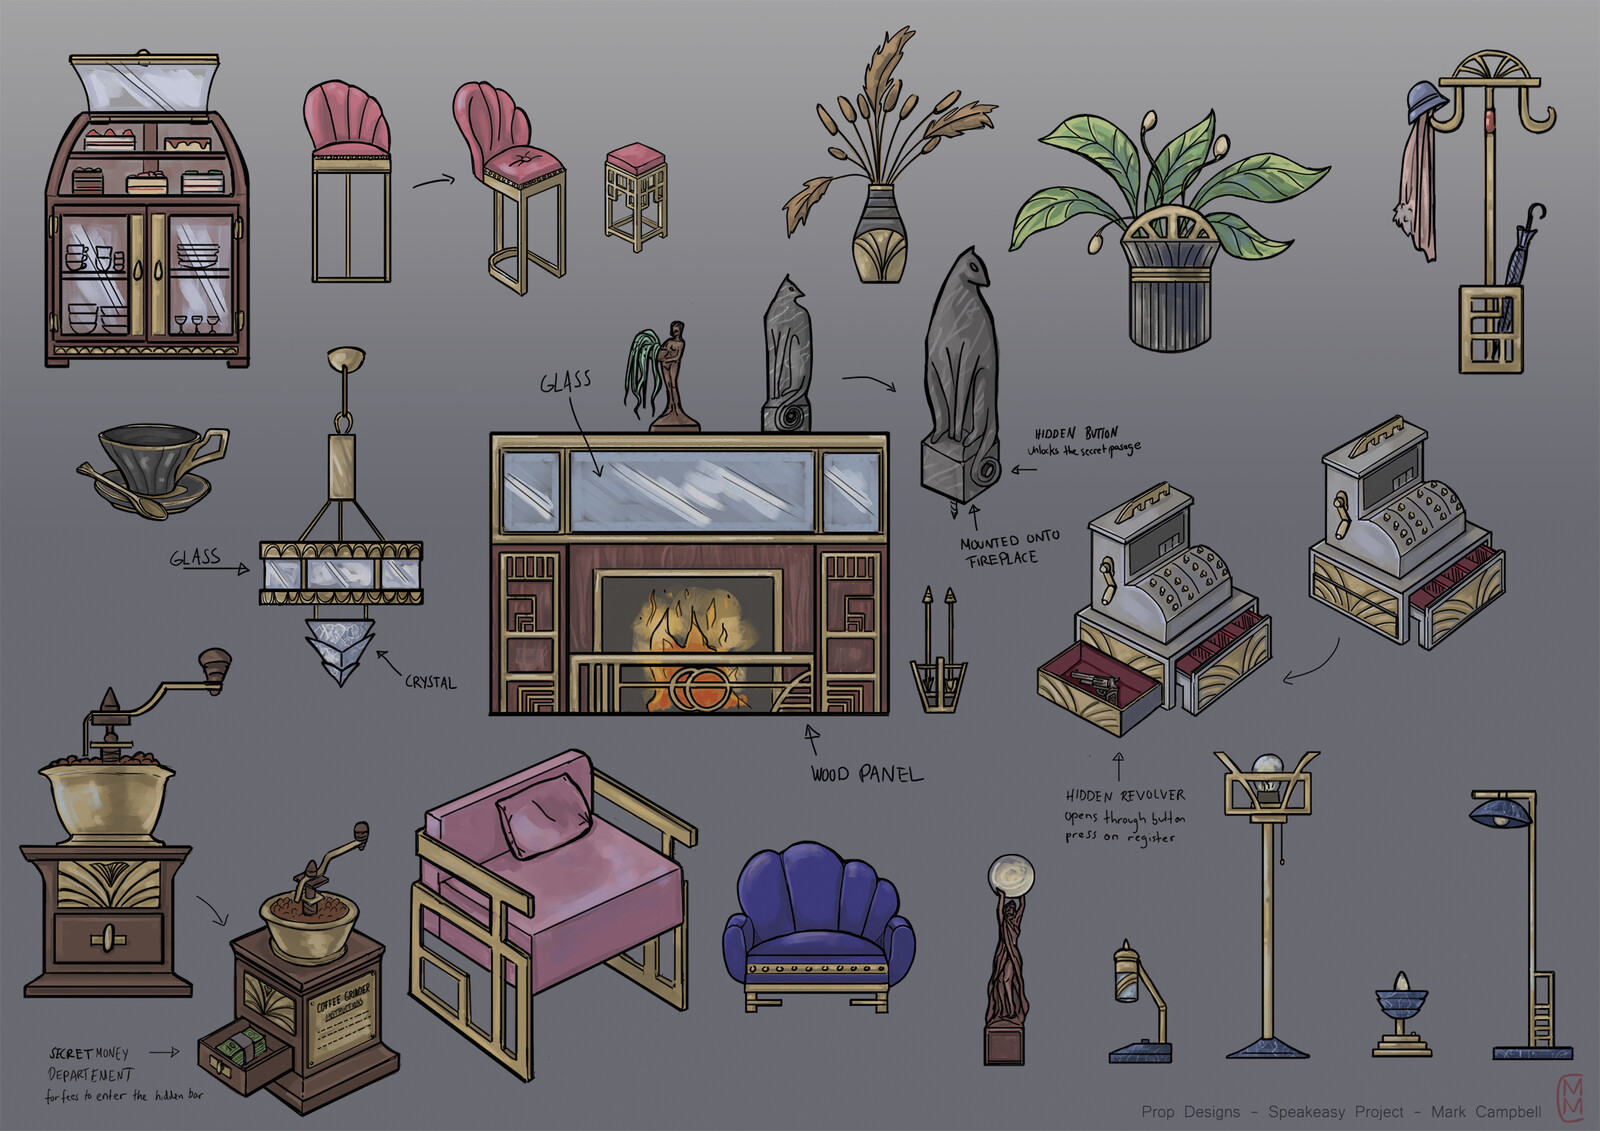 Prop designs, trying to stick to the Art Deco theme